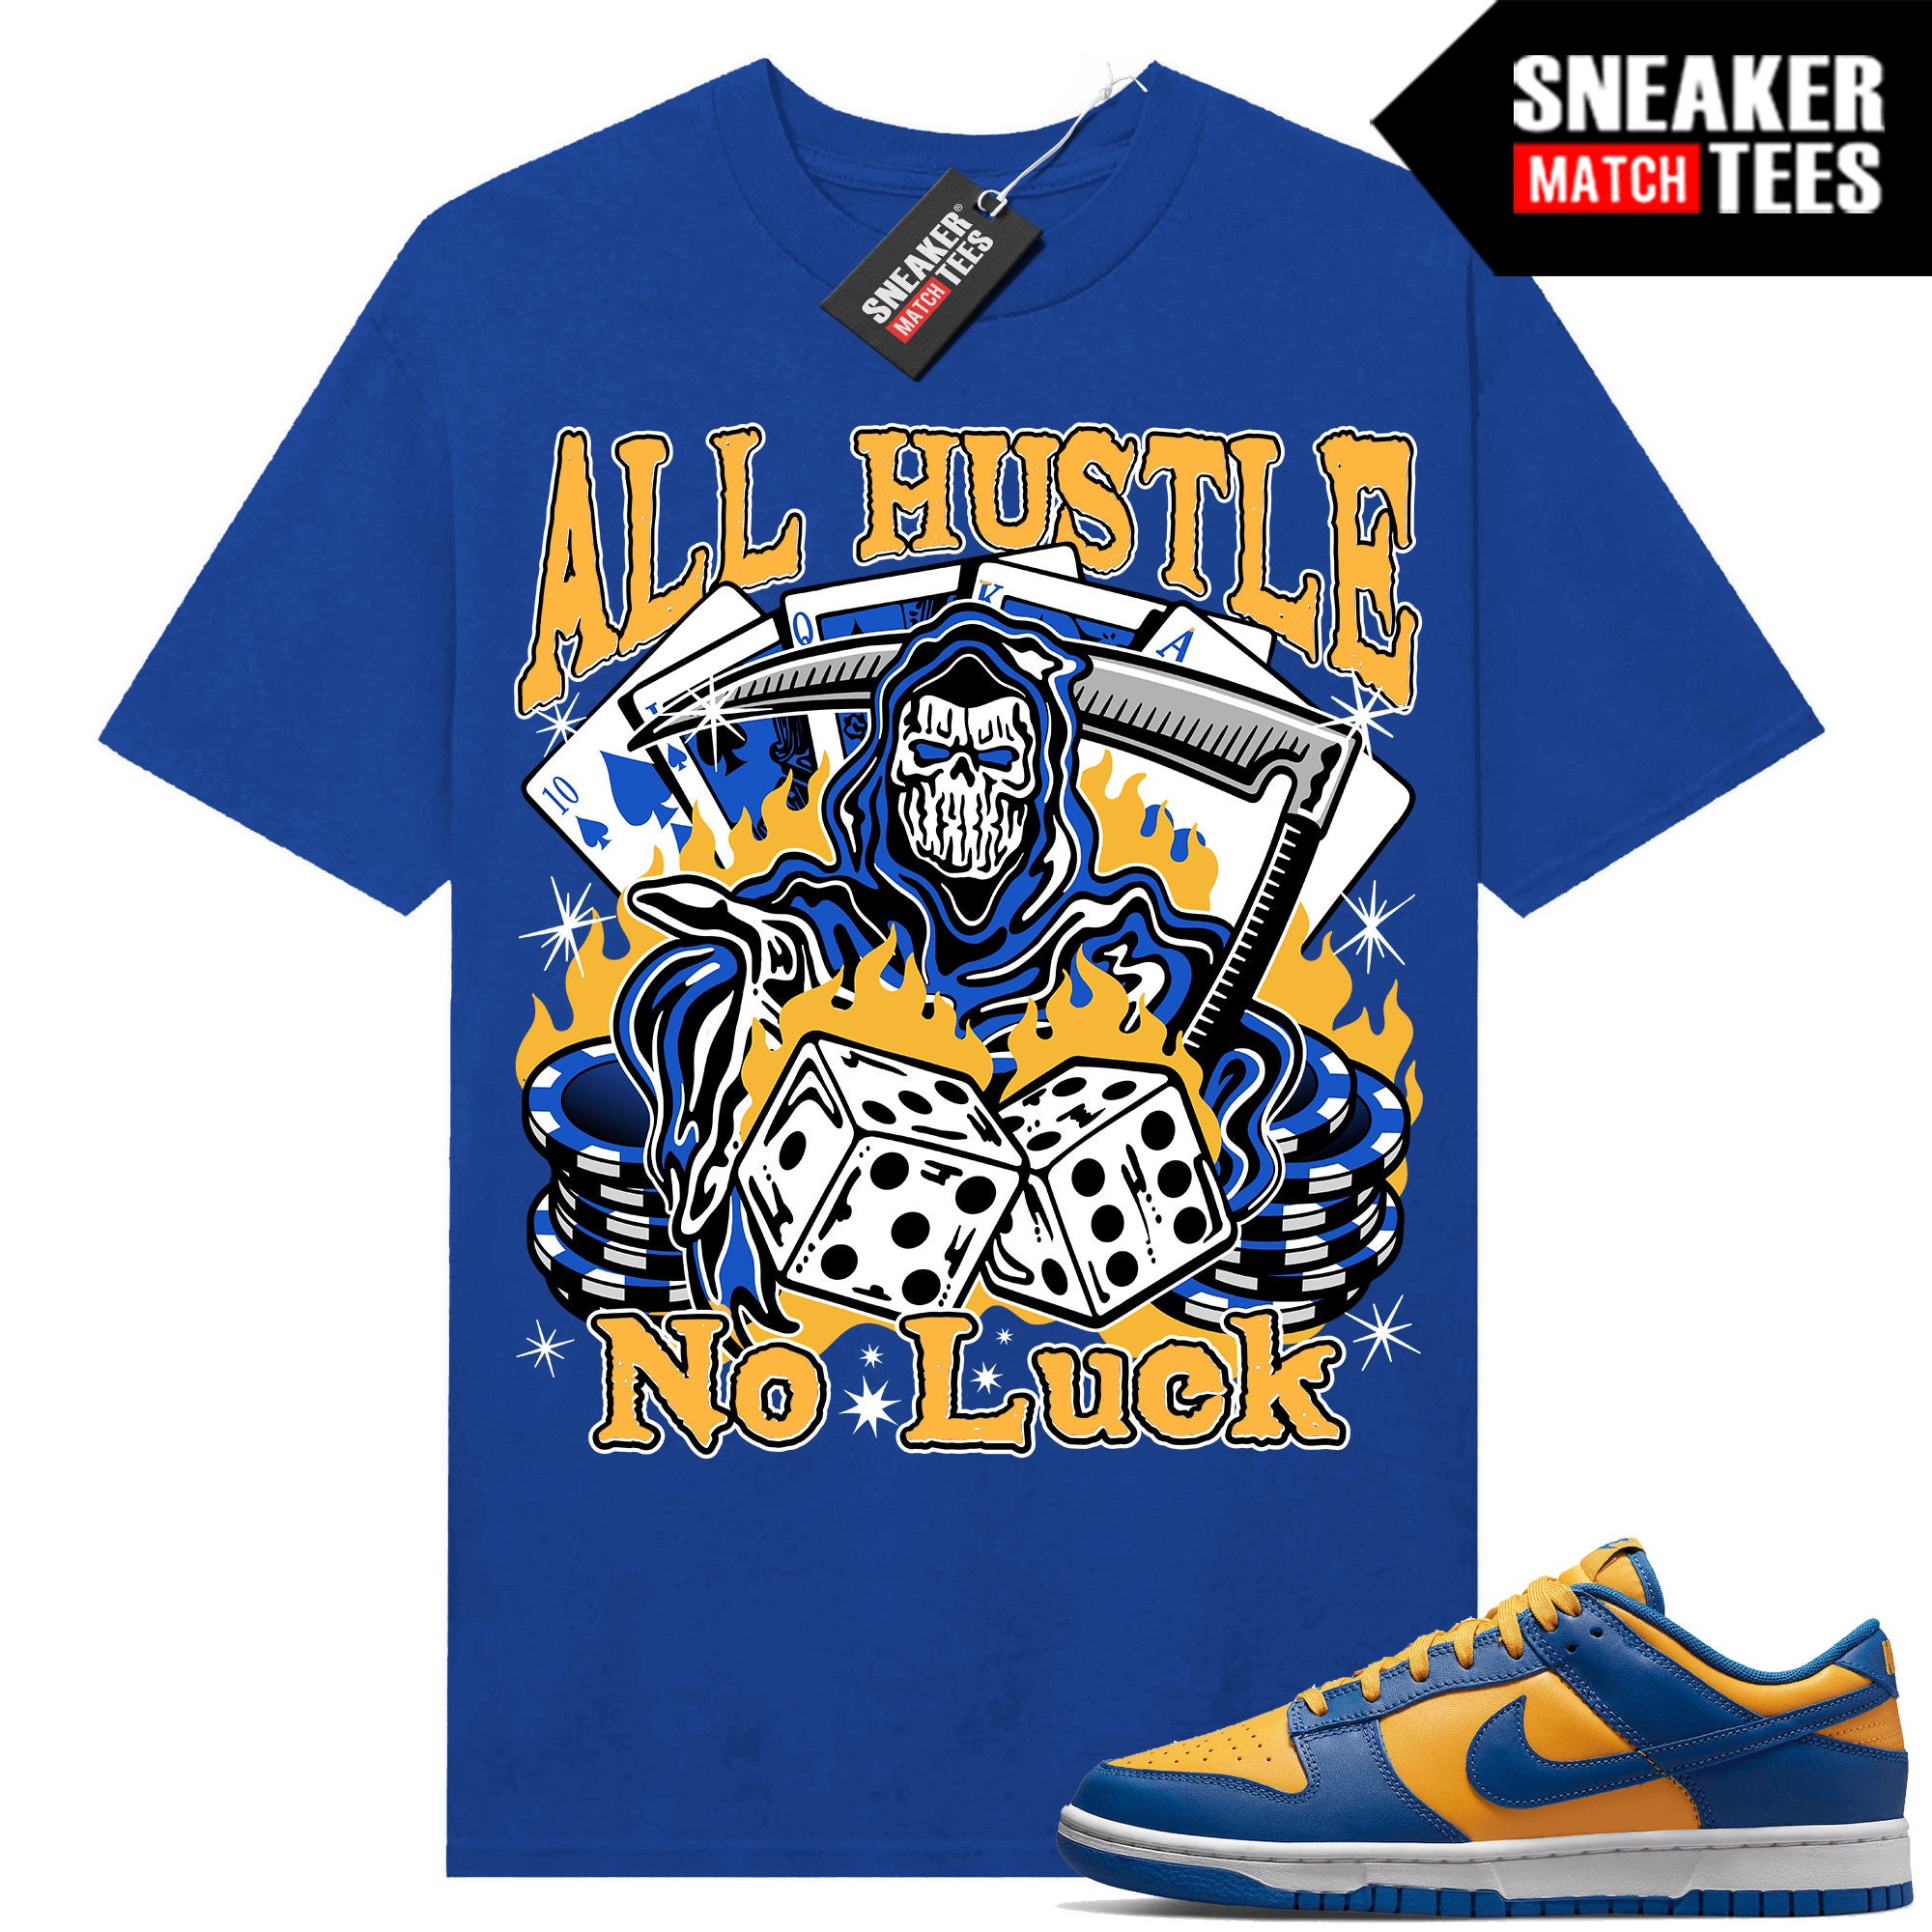 UCLA Dunk Low to match Sneaker Match Tees Royal "All Hustle No Luck"